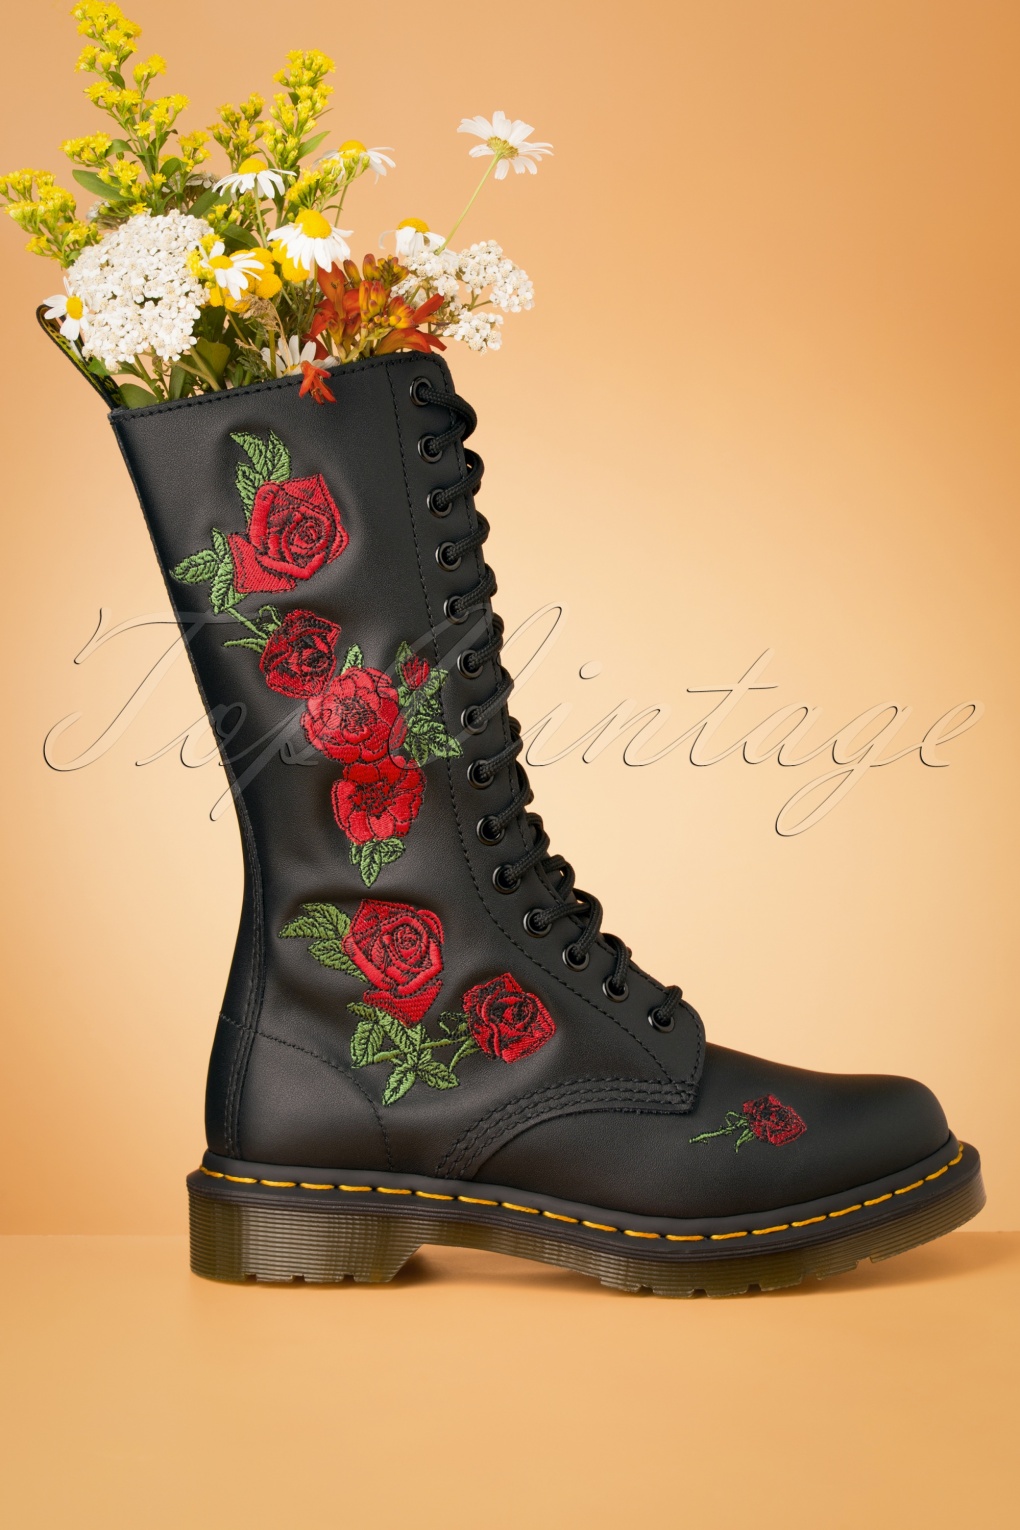 doc martens with red roses